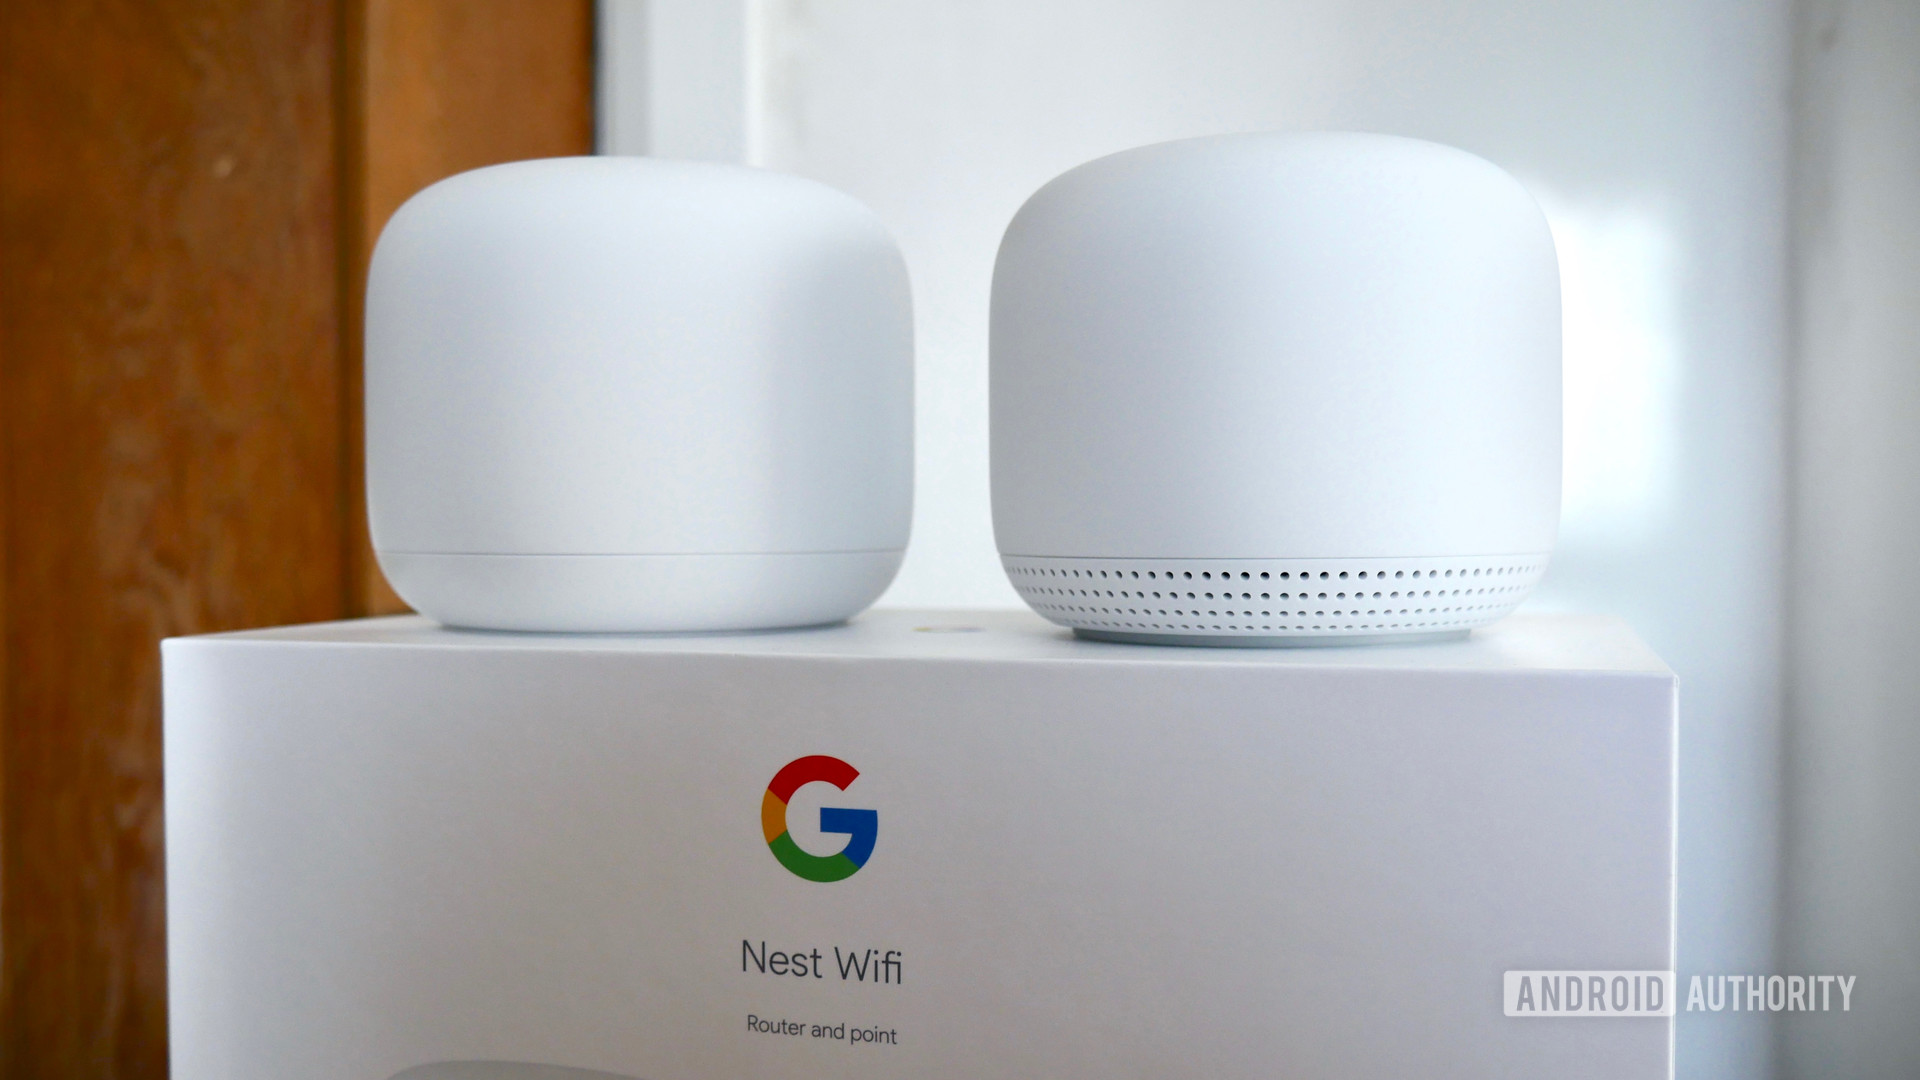 google nest wifi review on top of box